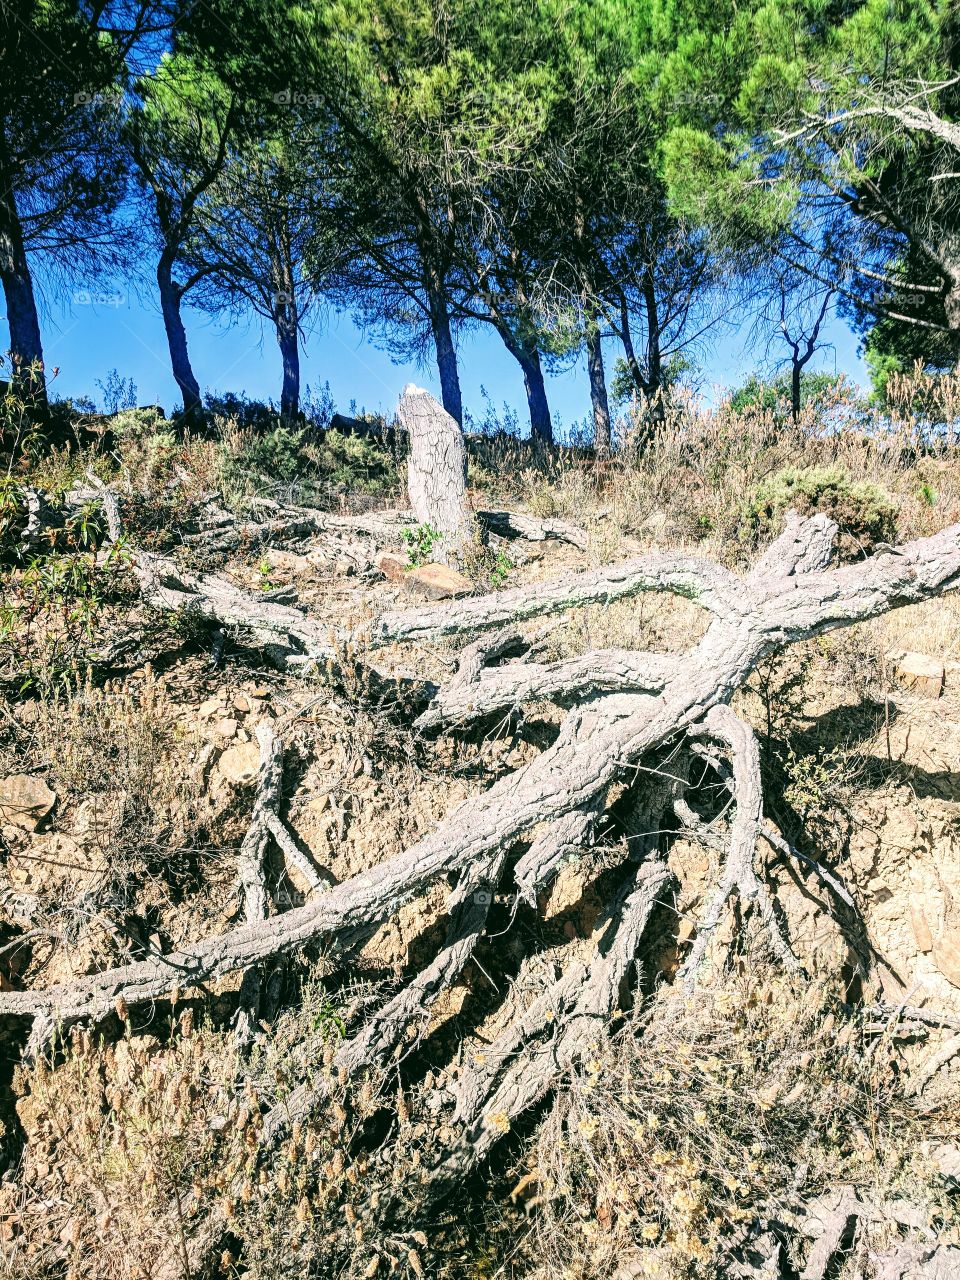 Roots of a dying tree